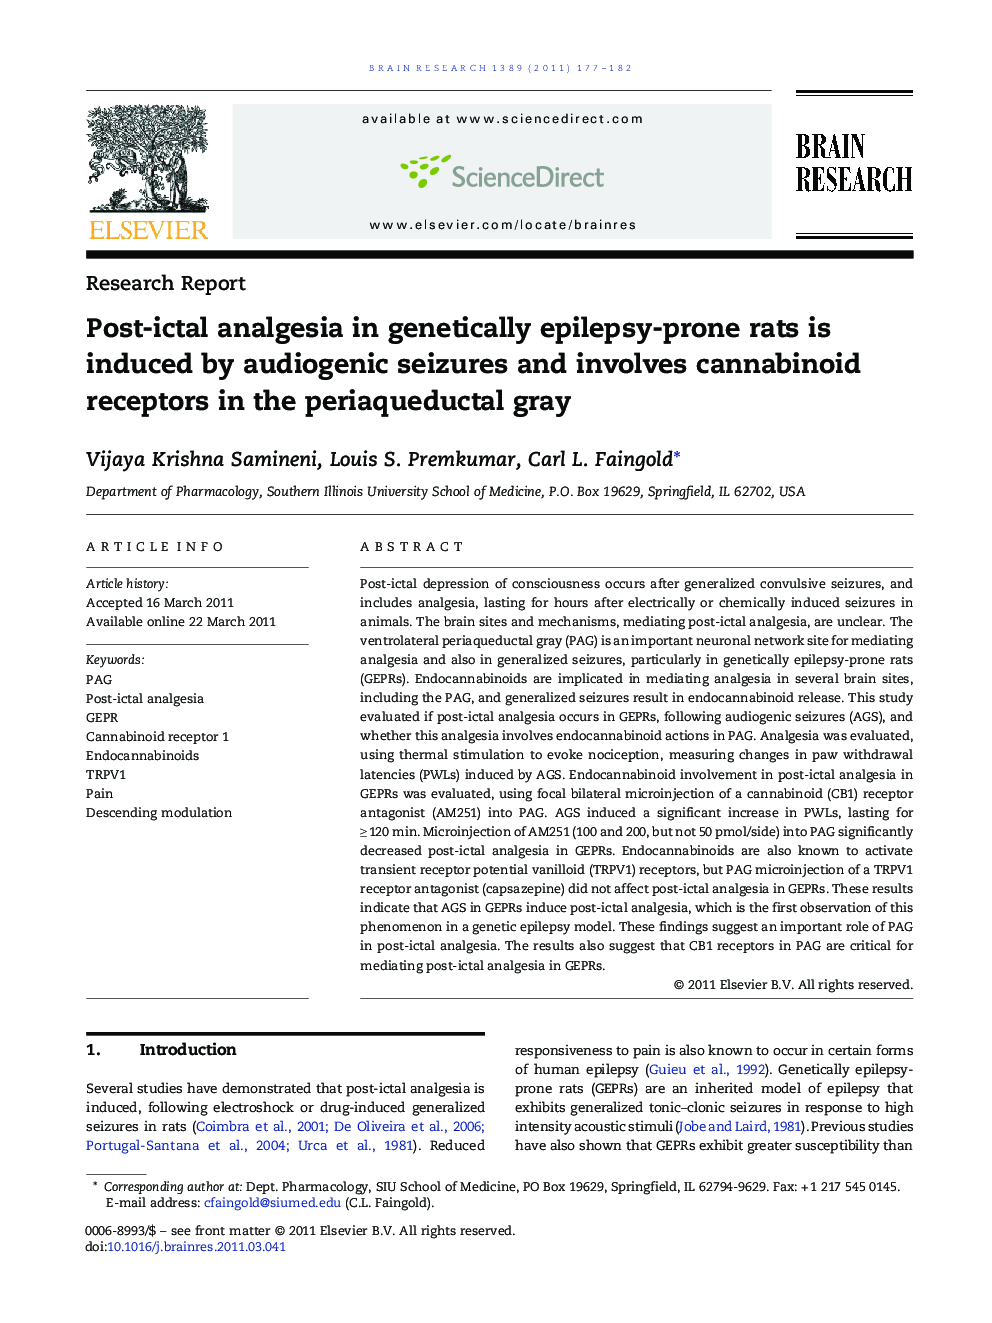 Post-ictal analgesia in genetically epilepsy-prone rats is induced by audiogenic seizures and involves cannabinoid receptors in the periaqueductal gray